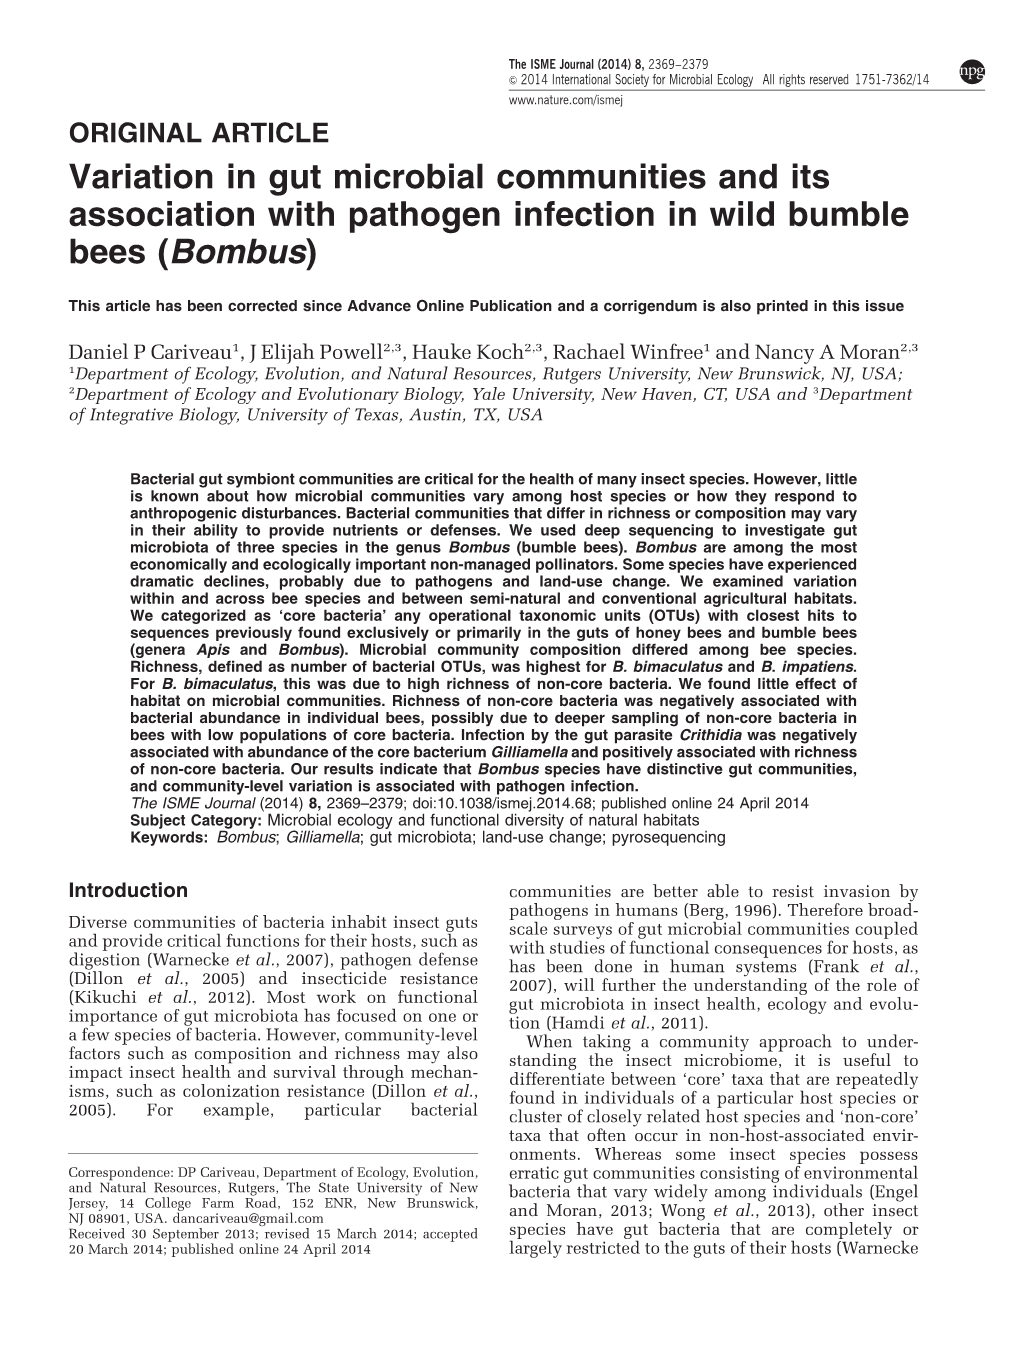 Variation in Gut Microbial Communities and Its Association with Pathogen Infection in Wild Bumble Bees (Bombus)